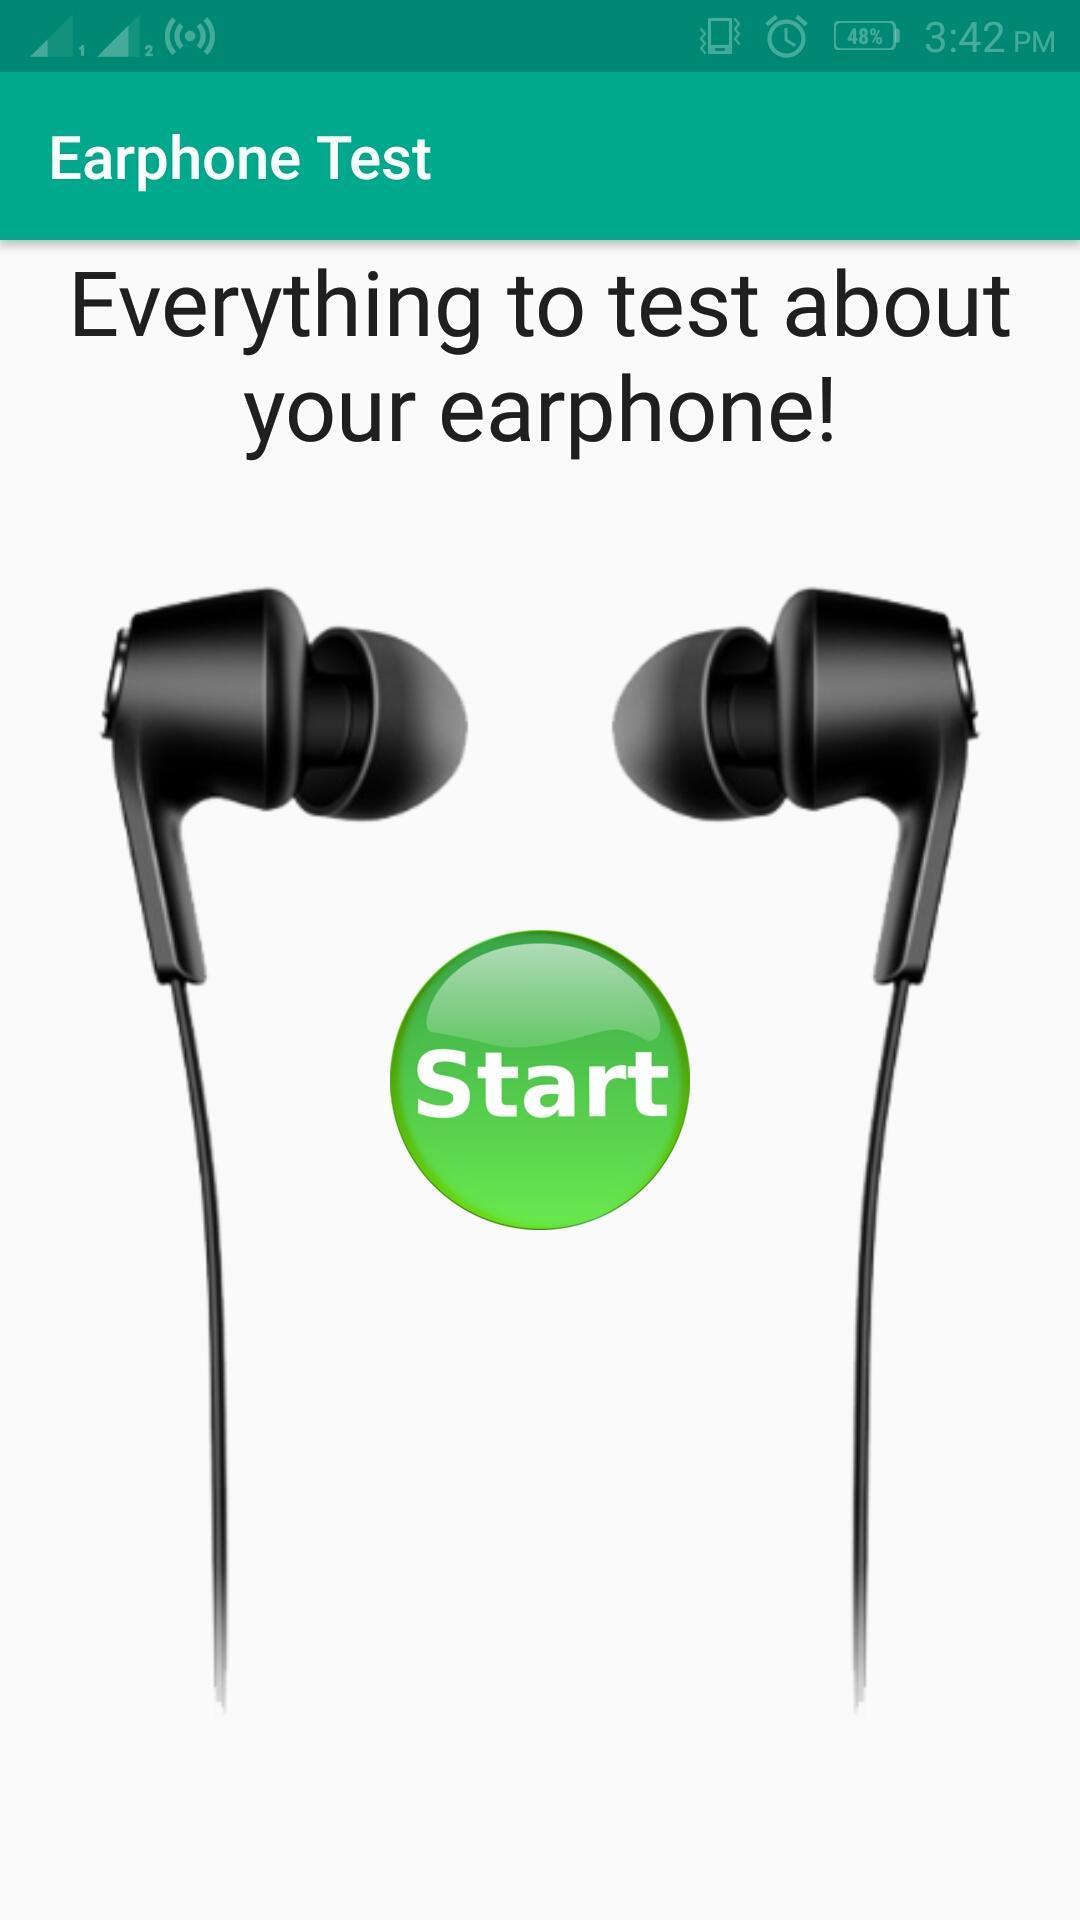 Earphone Test for Android - APK Download